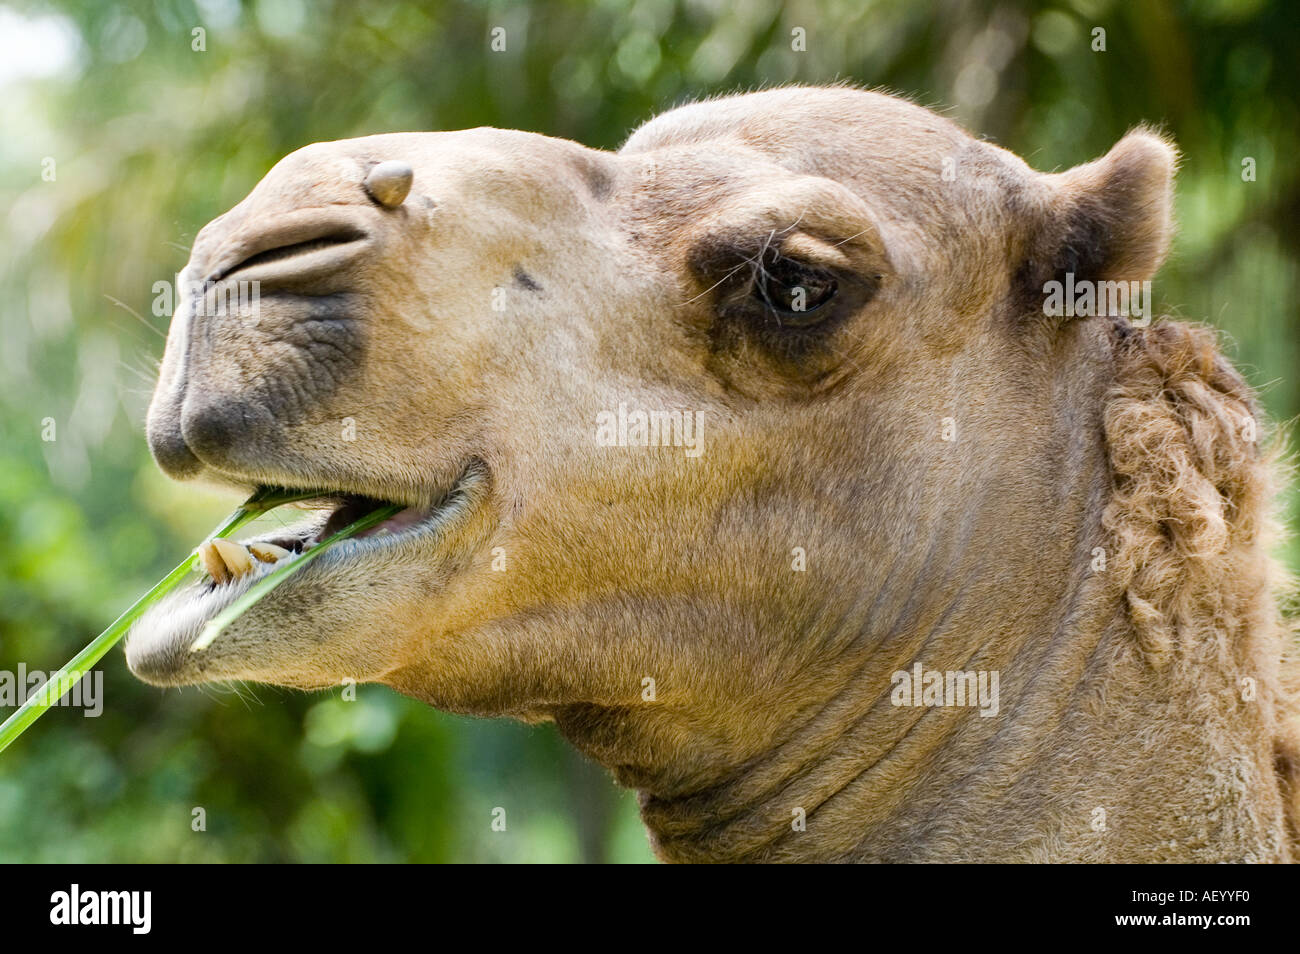 Dromedary one humped camel Camelus dromedarius eating grass in a tropical country Asia Malaysia Stock Photo